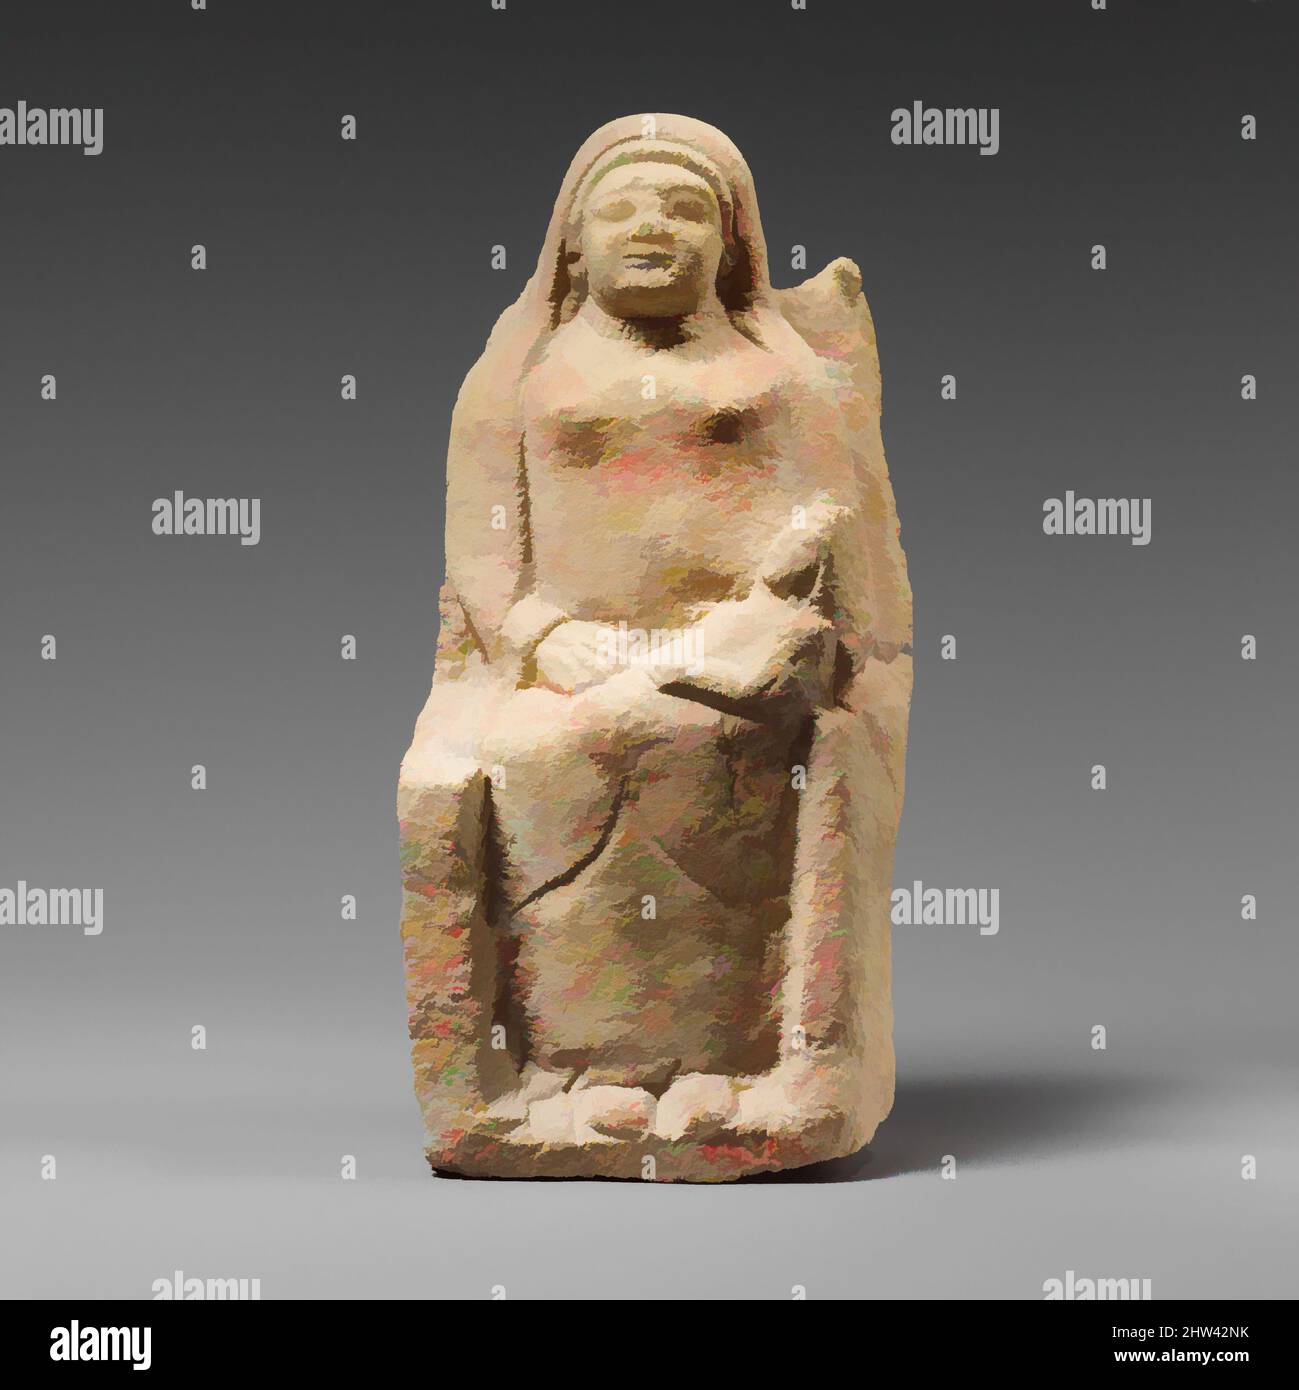 Art inspired by Seated limestone kourotrophos, Archaic, late 6th century B.C., Cypriot, Limestone, H.:7 1/4 x W.:3 1/4 xD.: 2 1/2 in. (18.4 x 8.3 x 6.3 cm), Stone Sculpture, Statue of 'nursing mother' with long veil seated on high-backed throne. The woman occupies a seat with a, Classic works modernized by Artotop with a splash of modernity. Shapes, color and value, eye-catching visual impact on art. Emotions through freedom of artworks in a contemporary way. A timeless message pursuing a wildly creative new direction. Artists turning to the digital medium and creating the Artotop NFT Stock Photo